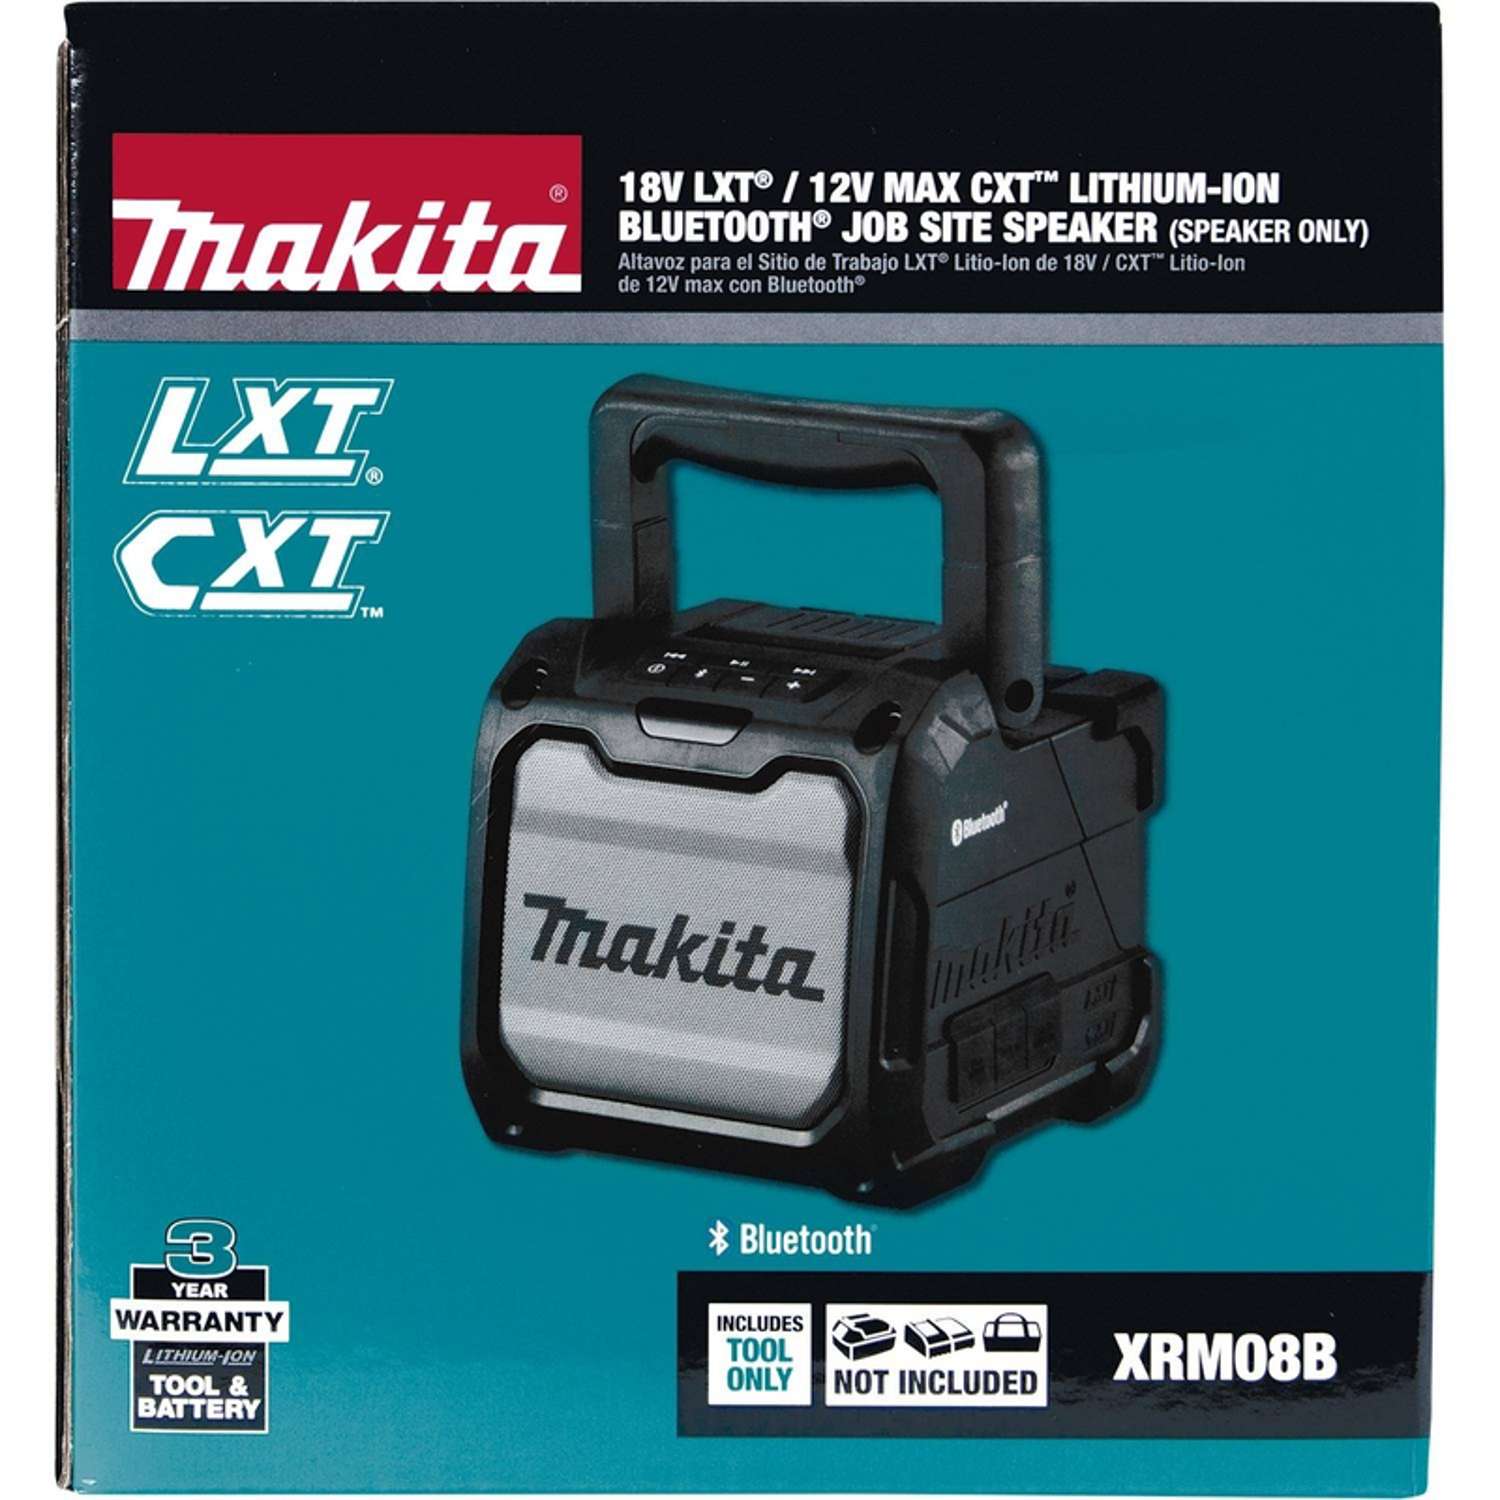 What's new with the latest version of the Makita jobsite radio? - Installer  Online